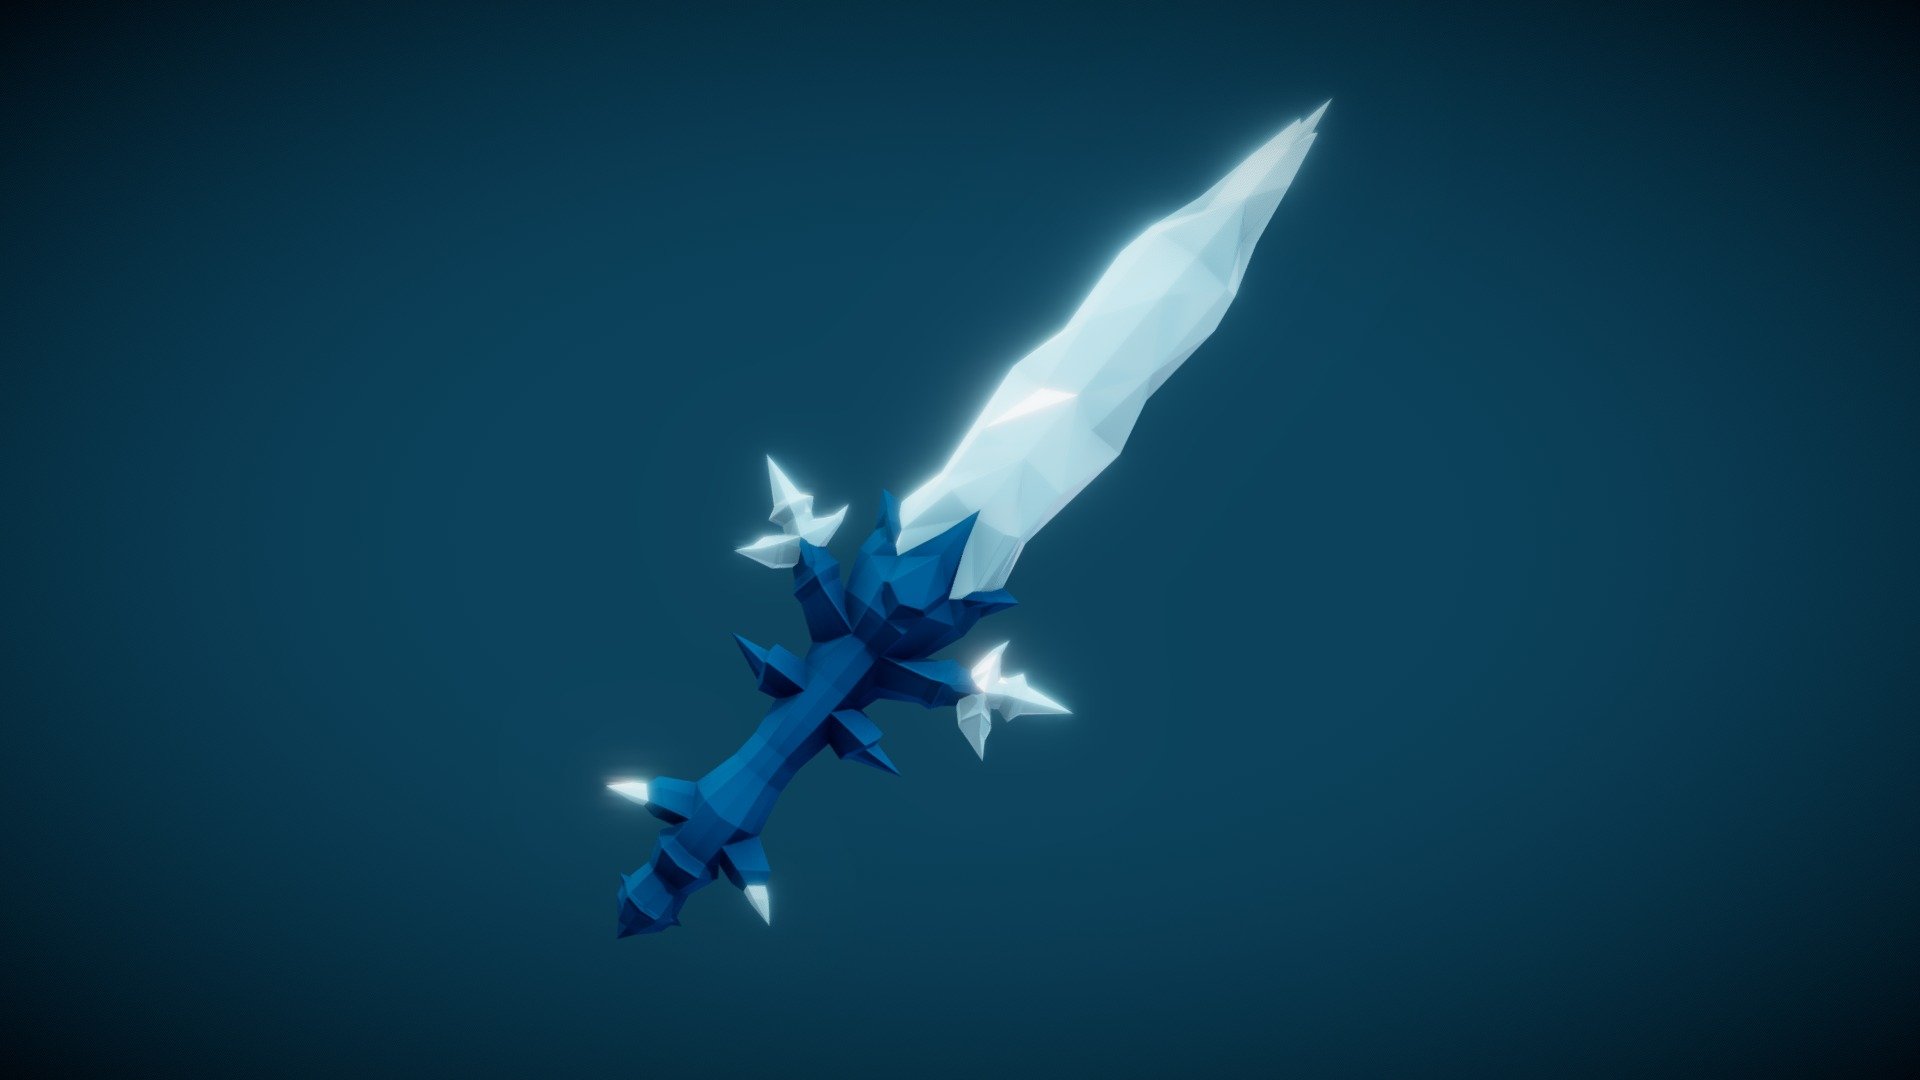 Swordtember2021 Day 6: #Snow.
Frostblossom.

Every strike howls and cuts like a hundred blizzards.


Swordtember - Swordtember 2021 Day 6: Snow - 3D model by Liberi Arcano (@LiberiArcano) 3d model